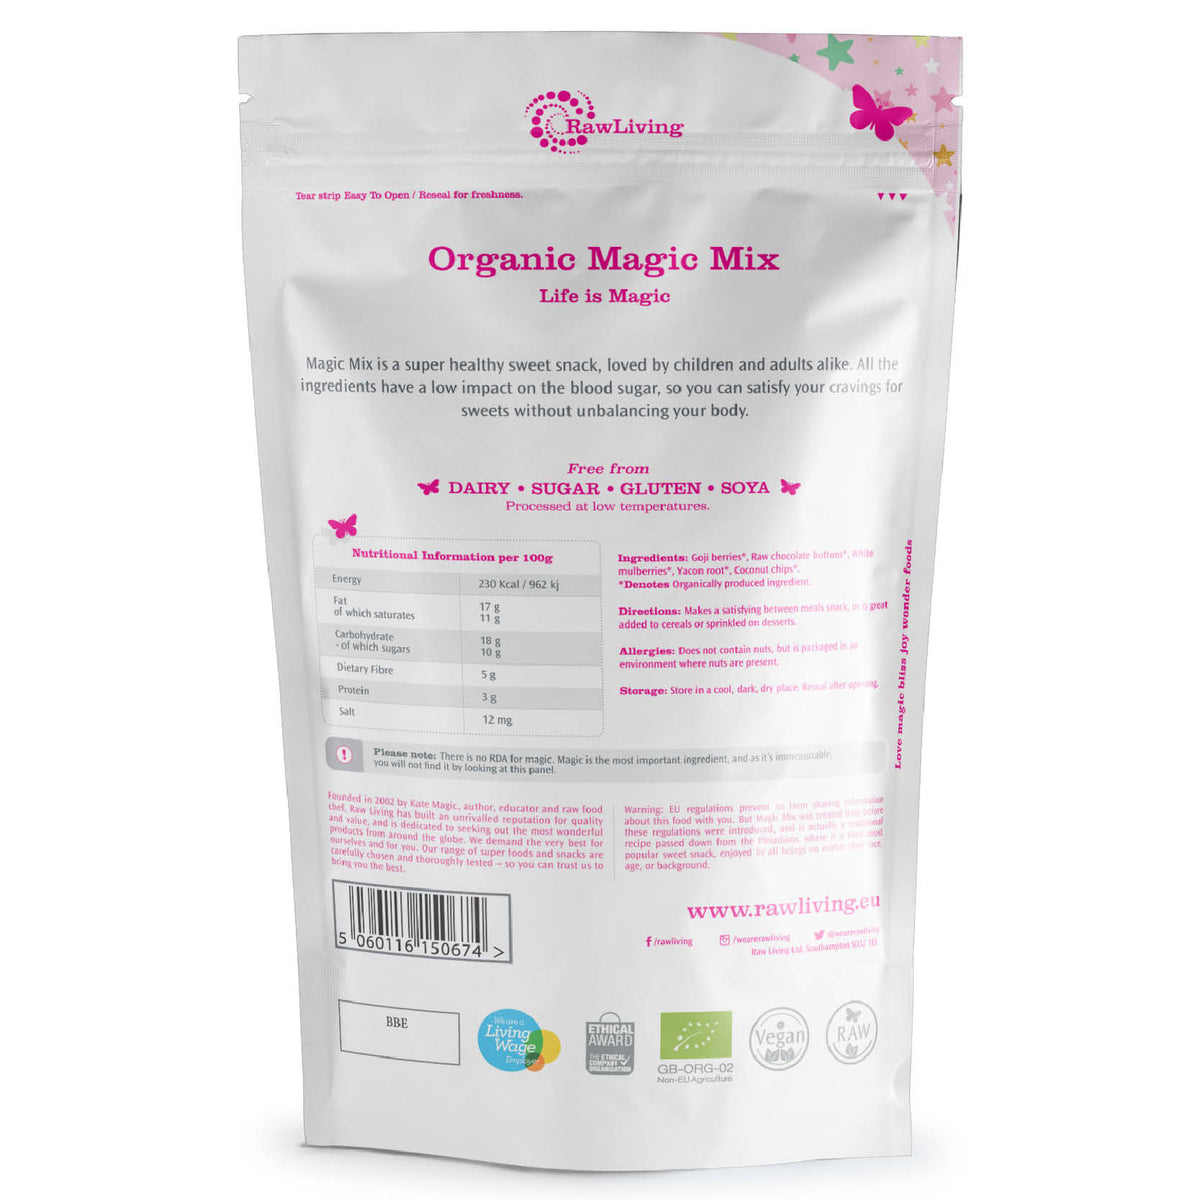 Organic Magic Mix | Raw Living UK | Raw Foods | Raw Snacks | Super Foods | Raw Living Organic Magic Mix is a delicious Raw Vegan Snack. Made with a combination of Goji Berries, Mulberries, Yacon Root, Coconut Chips &amp; Chocolate Buttons.